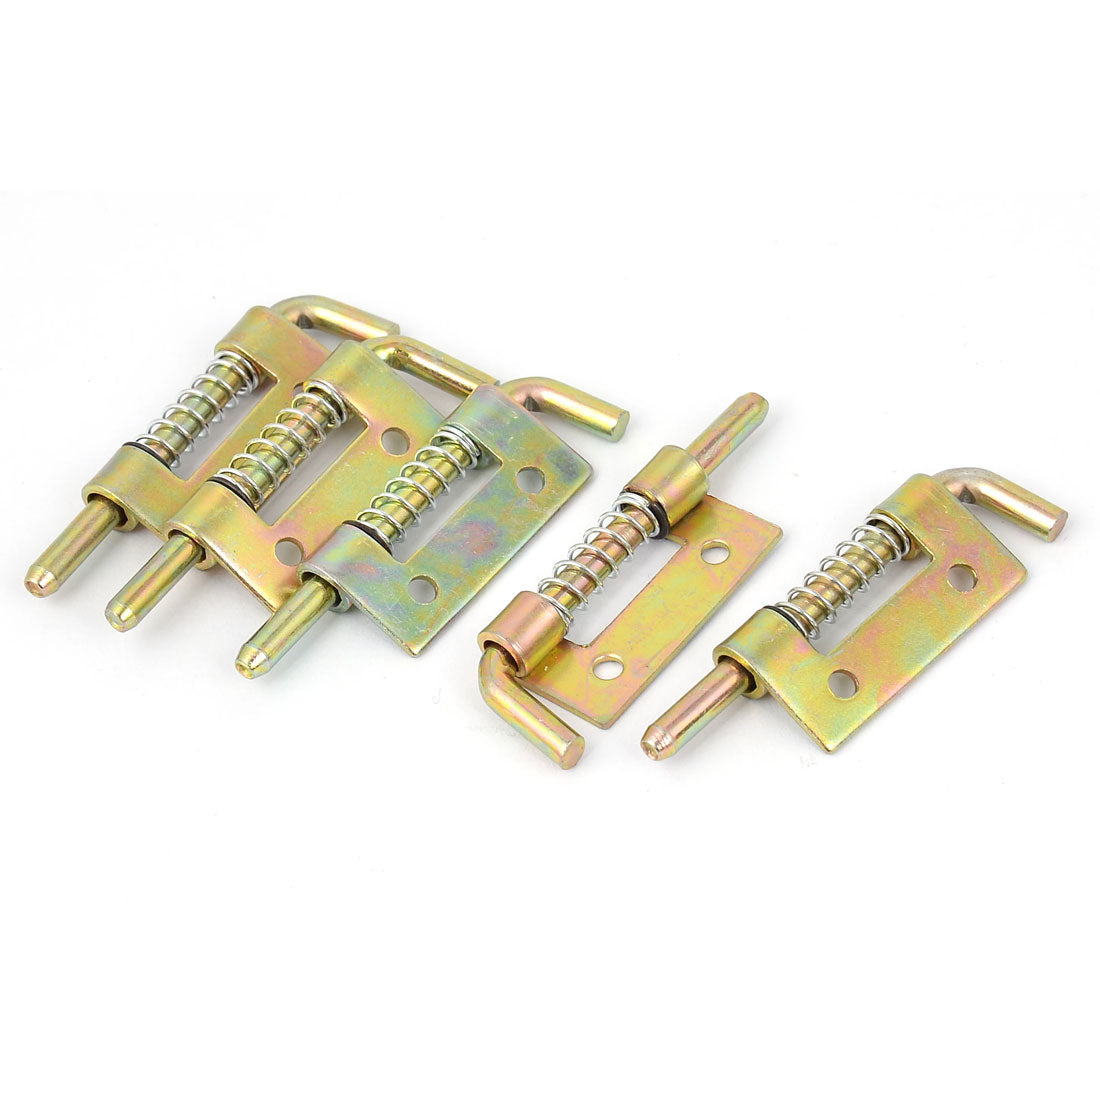 uxcell Uxcell M4 4mm Dia Bolt Spring Loaded Window Locking Right Slide Lock Latch 5pcs